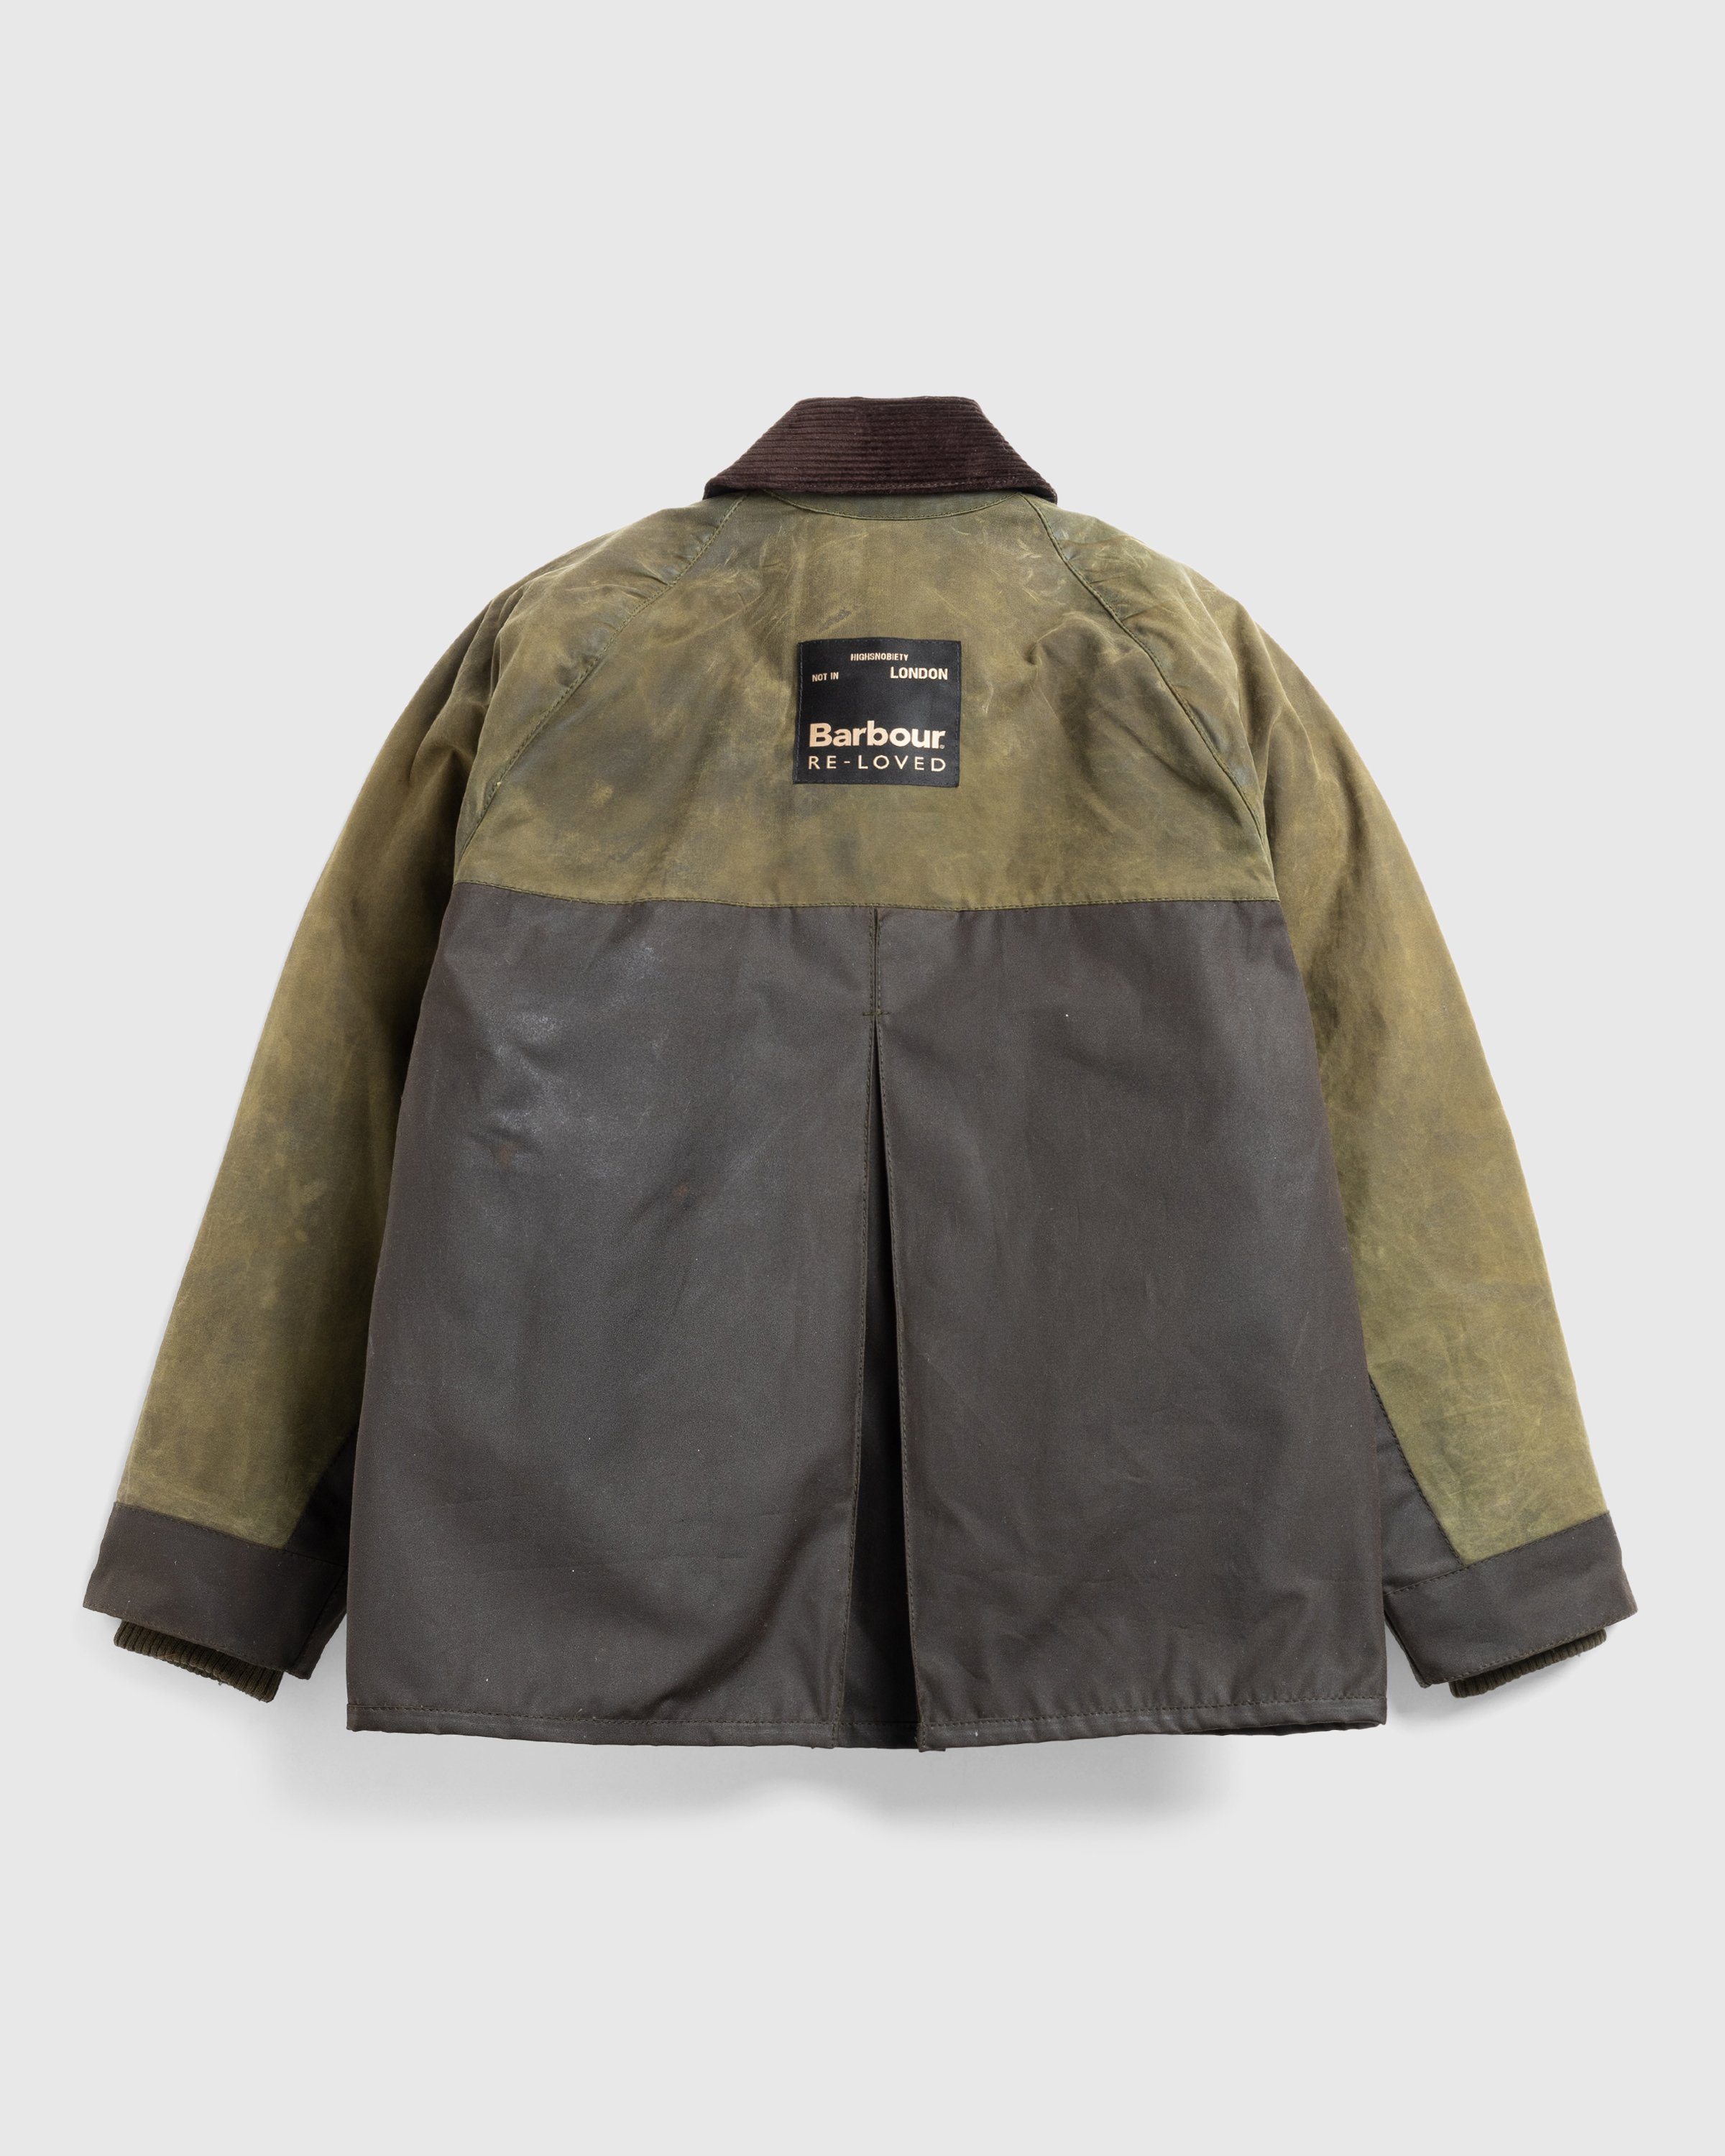 Barbour x Highsnobiety - Re-Loved Cropped Bedale Jacket 1 - 34 - Olive-Green - Clothing - Olive - Image 2